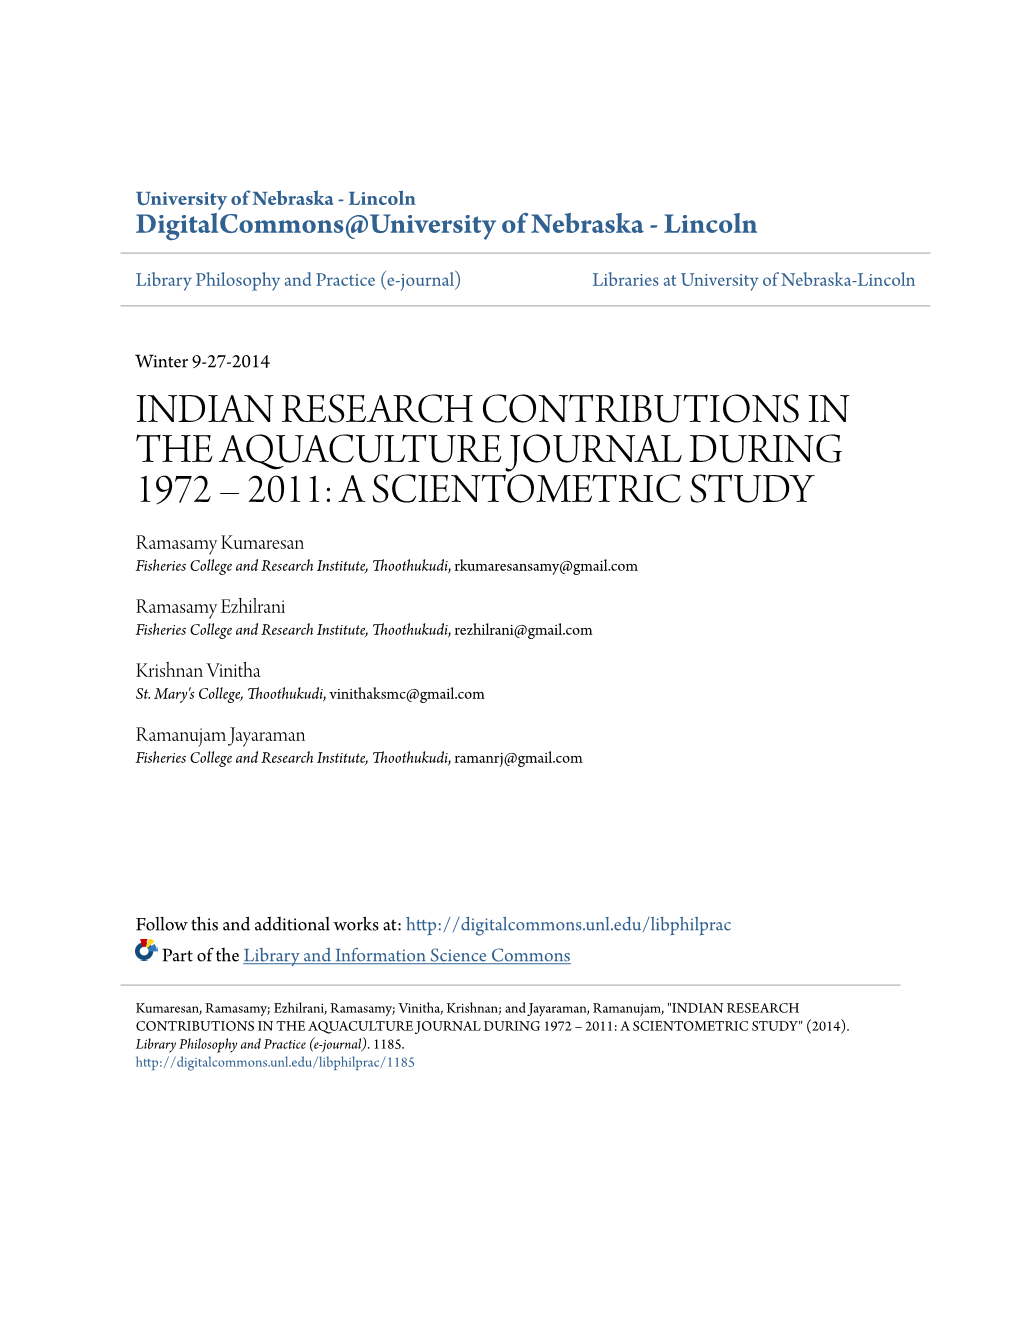 Indian Research Contributions in The